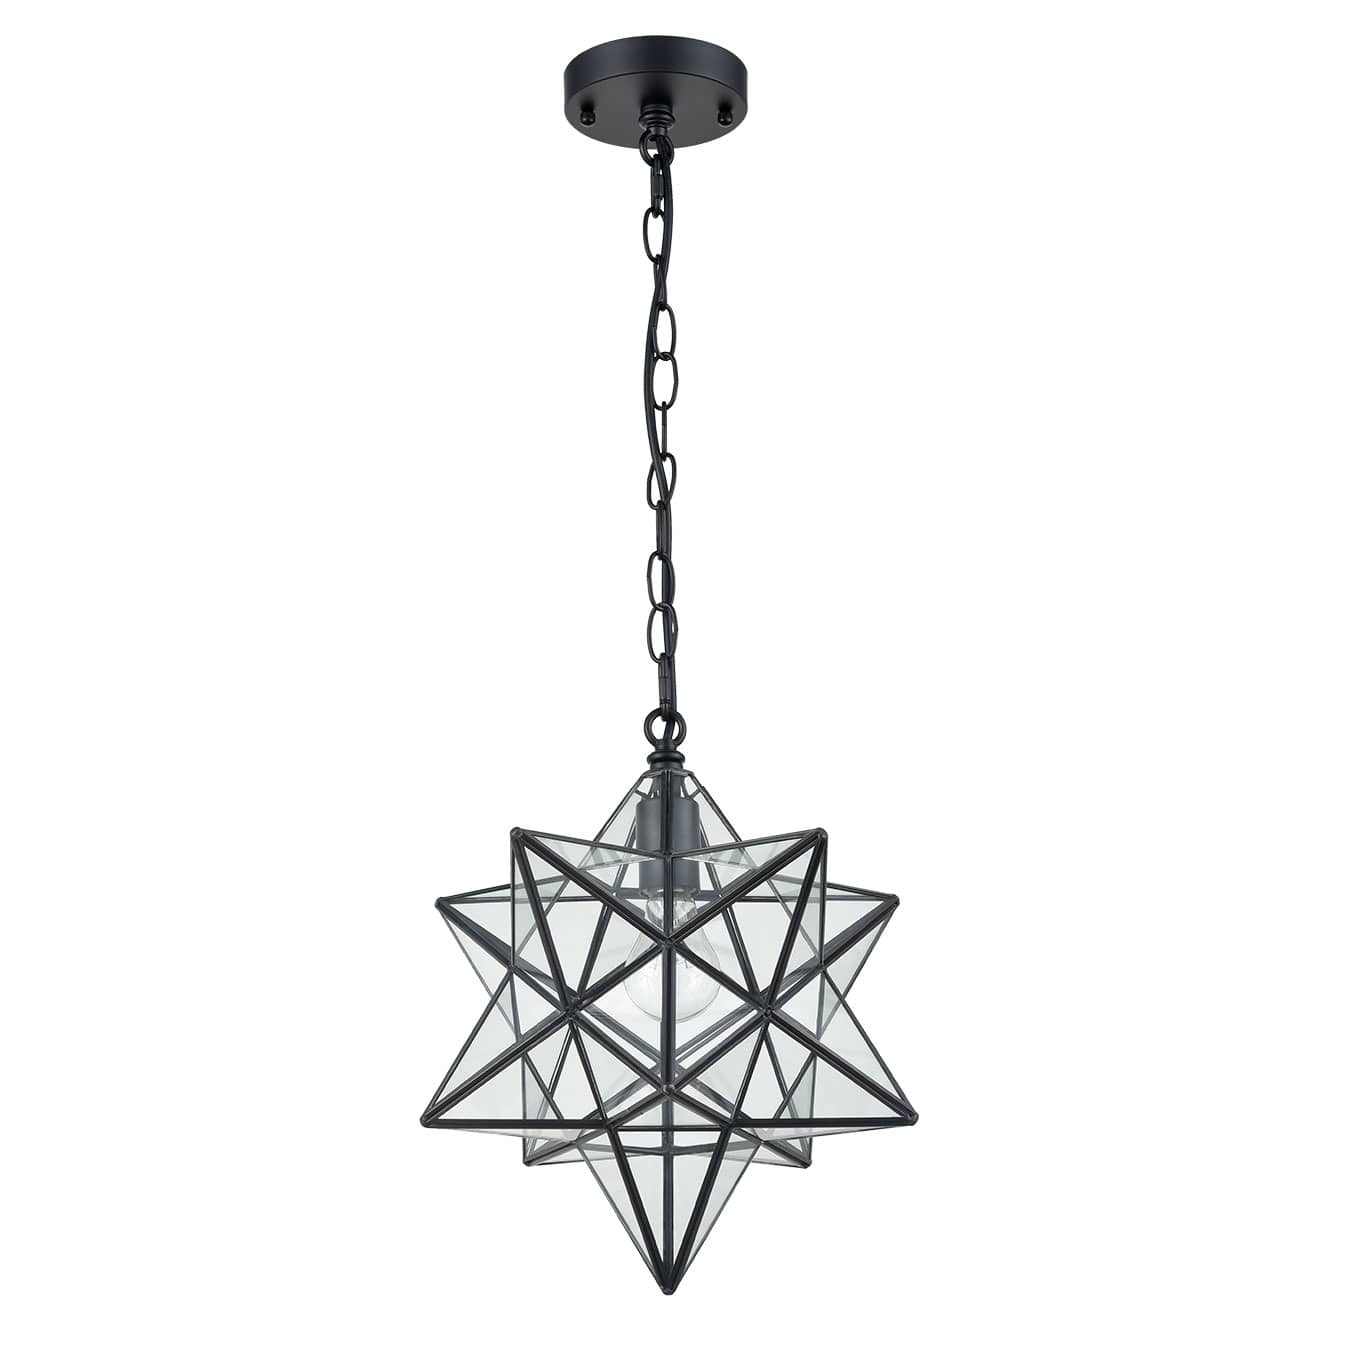 Moravian Star Pendant Lights Clear Glass Shade , 14